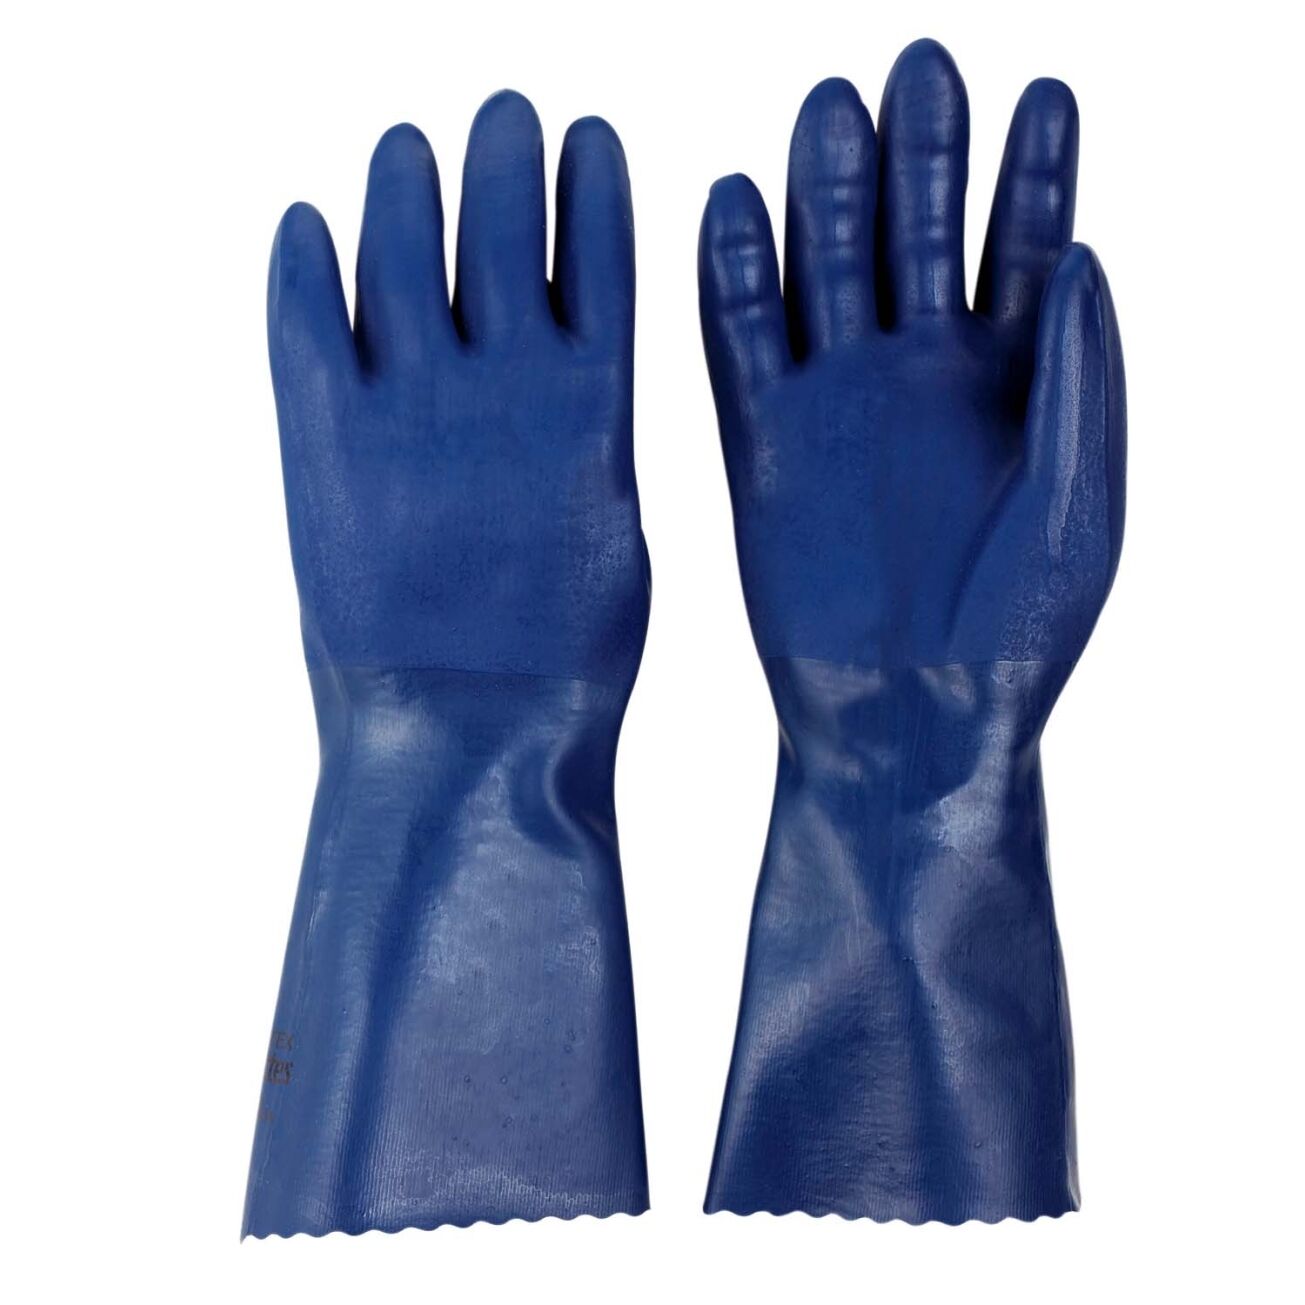 Spontex Bluettes Gloves - 4 Sizes - Cleaning Gardening Dishes Rubber Heavy Duty